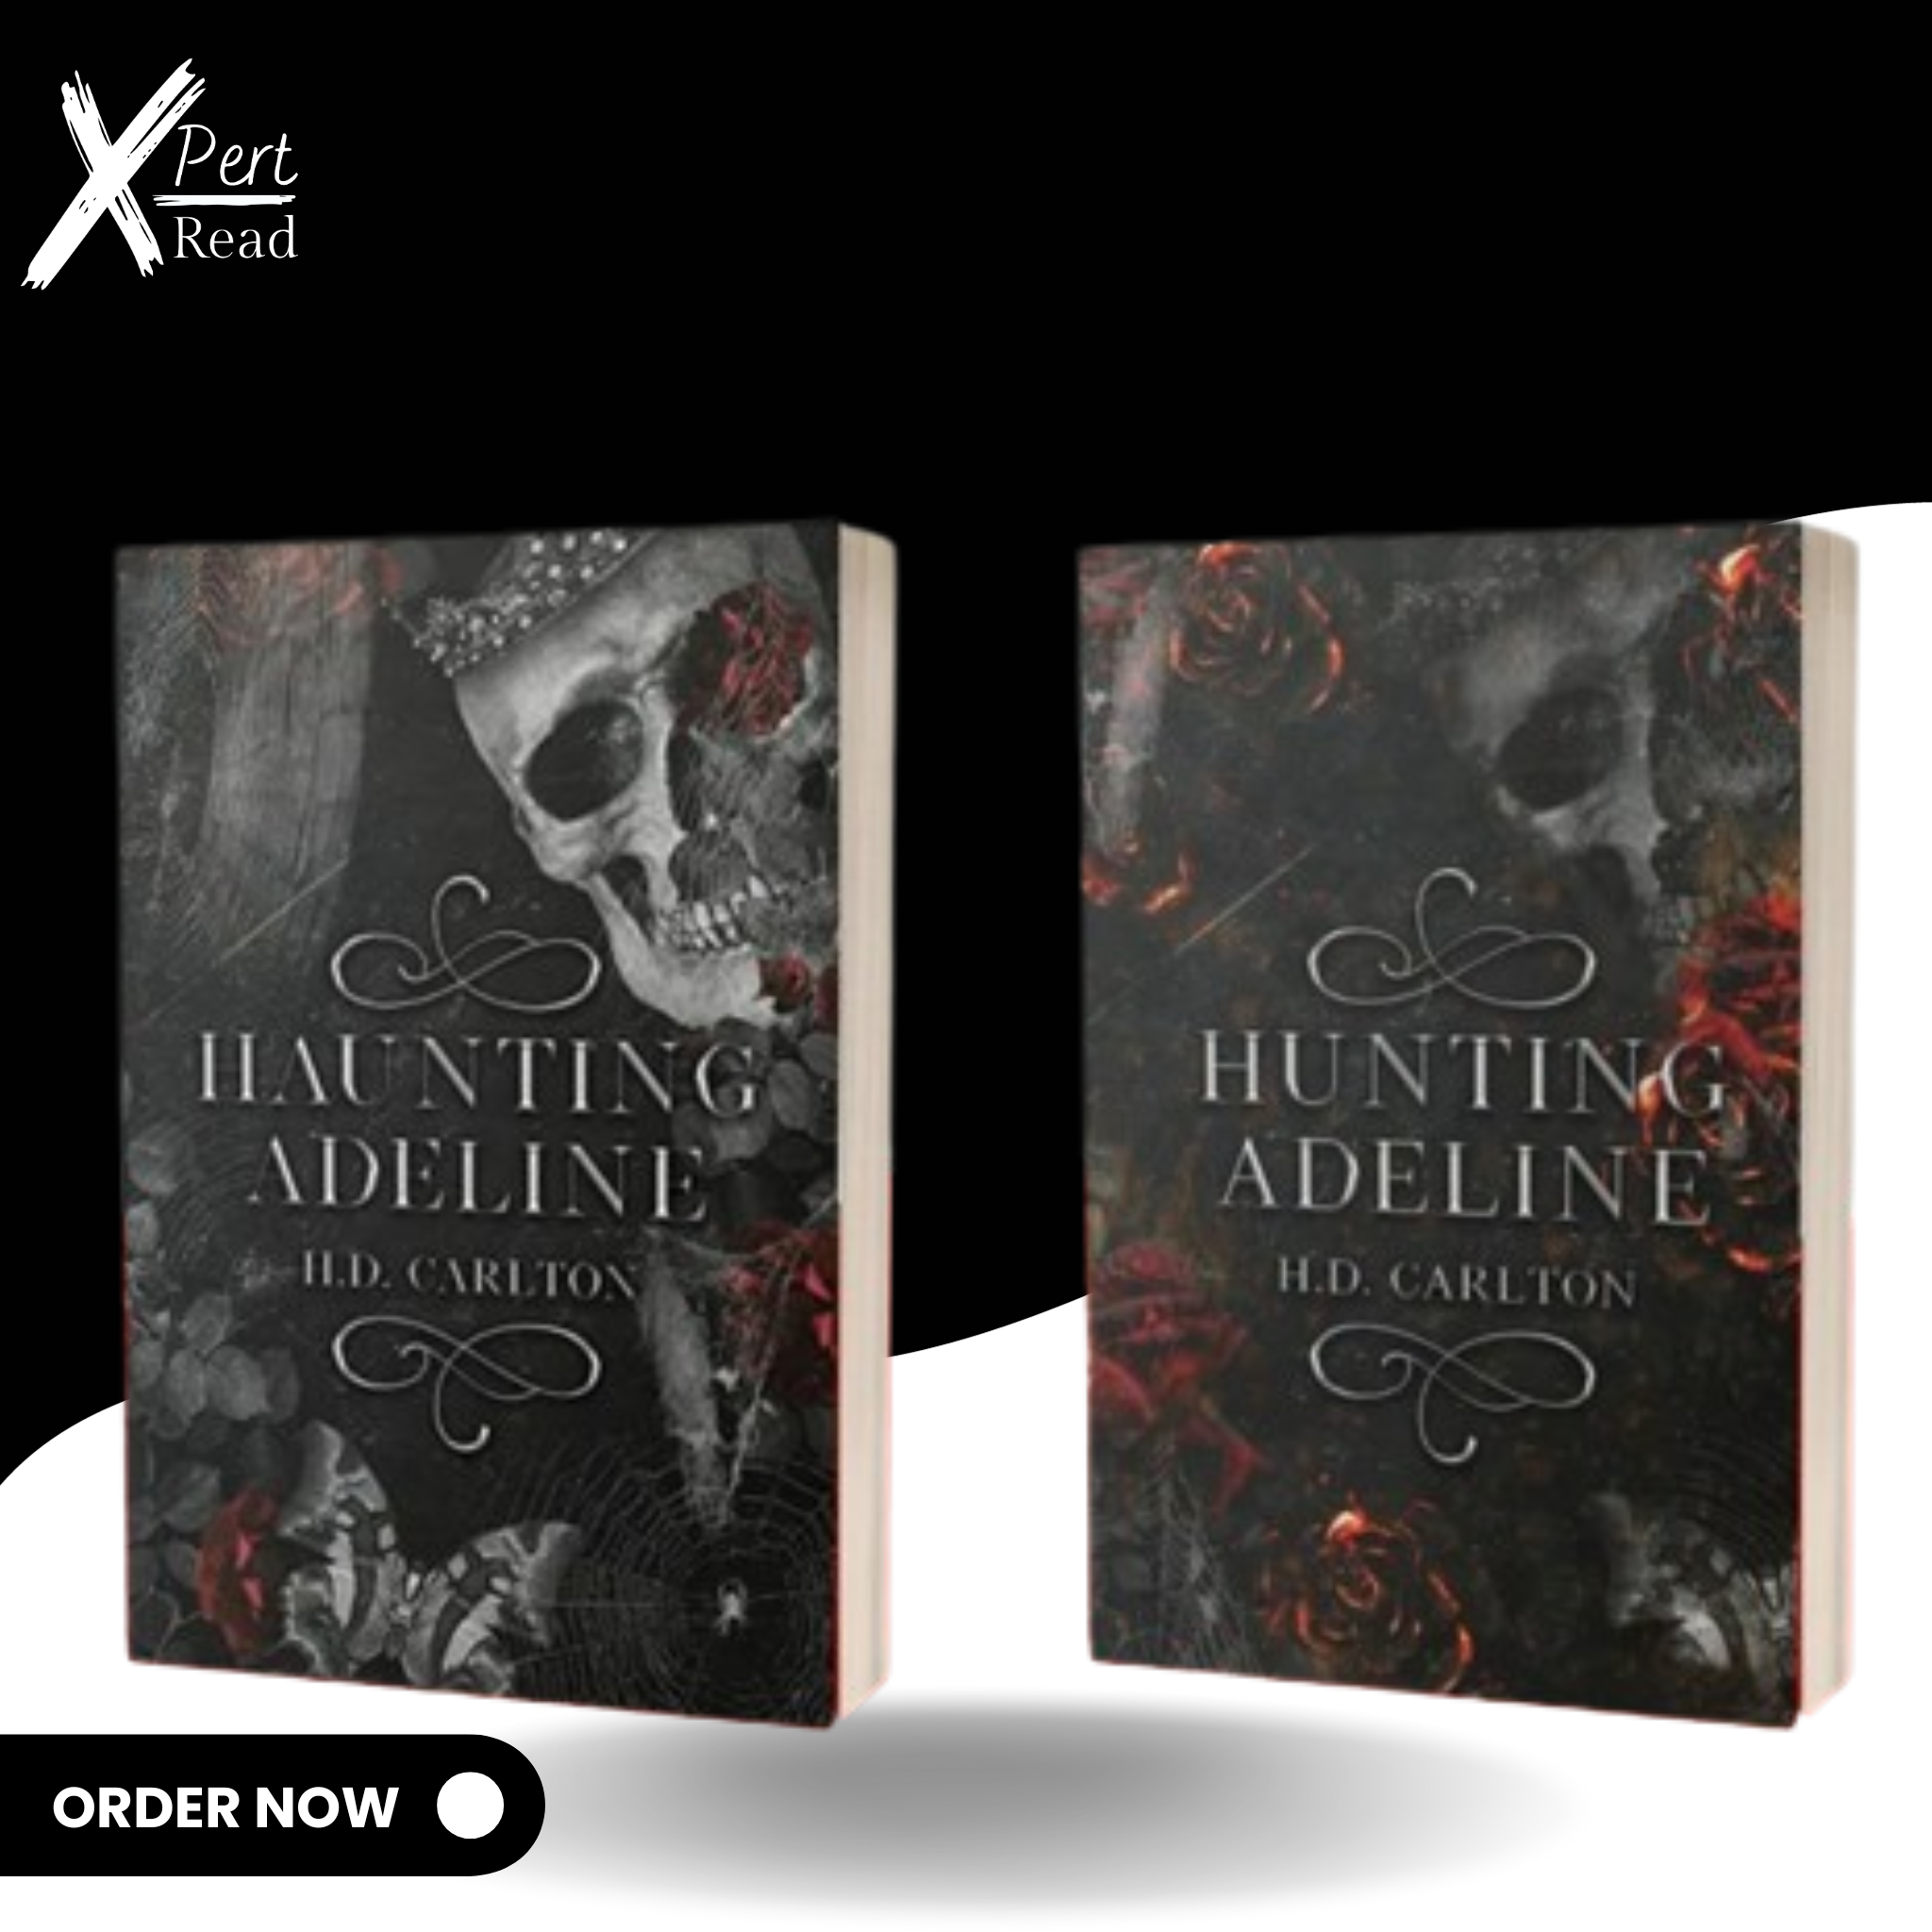 Haunting Adeline and Hunting Adeline By H. D. Carlton (Set Of 2 Books) (Cat And Mouse Series)